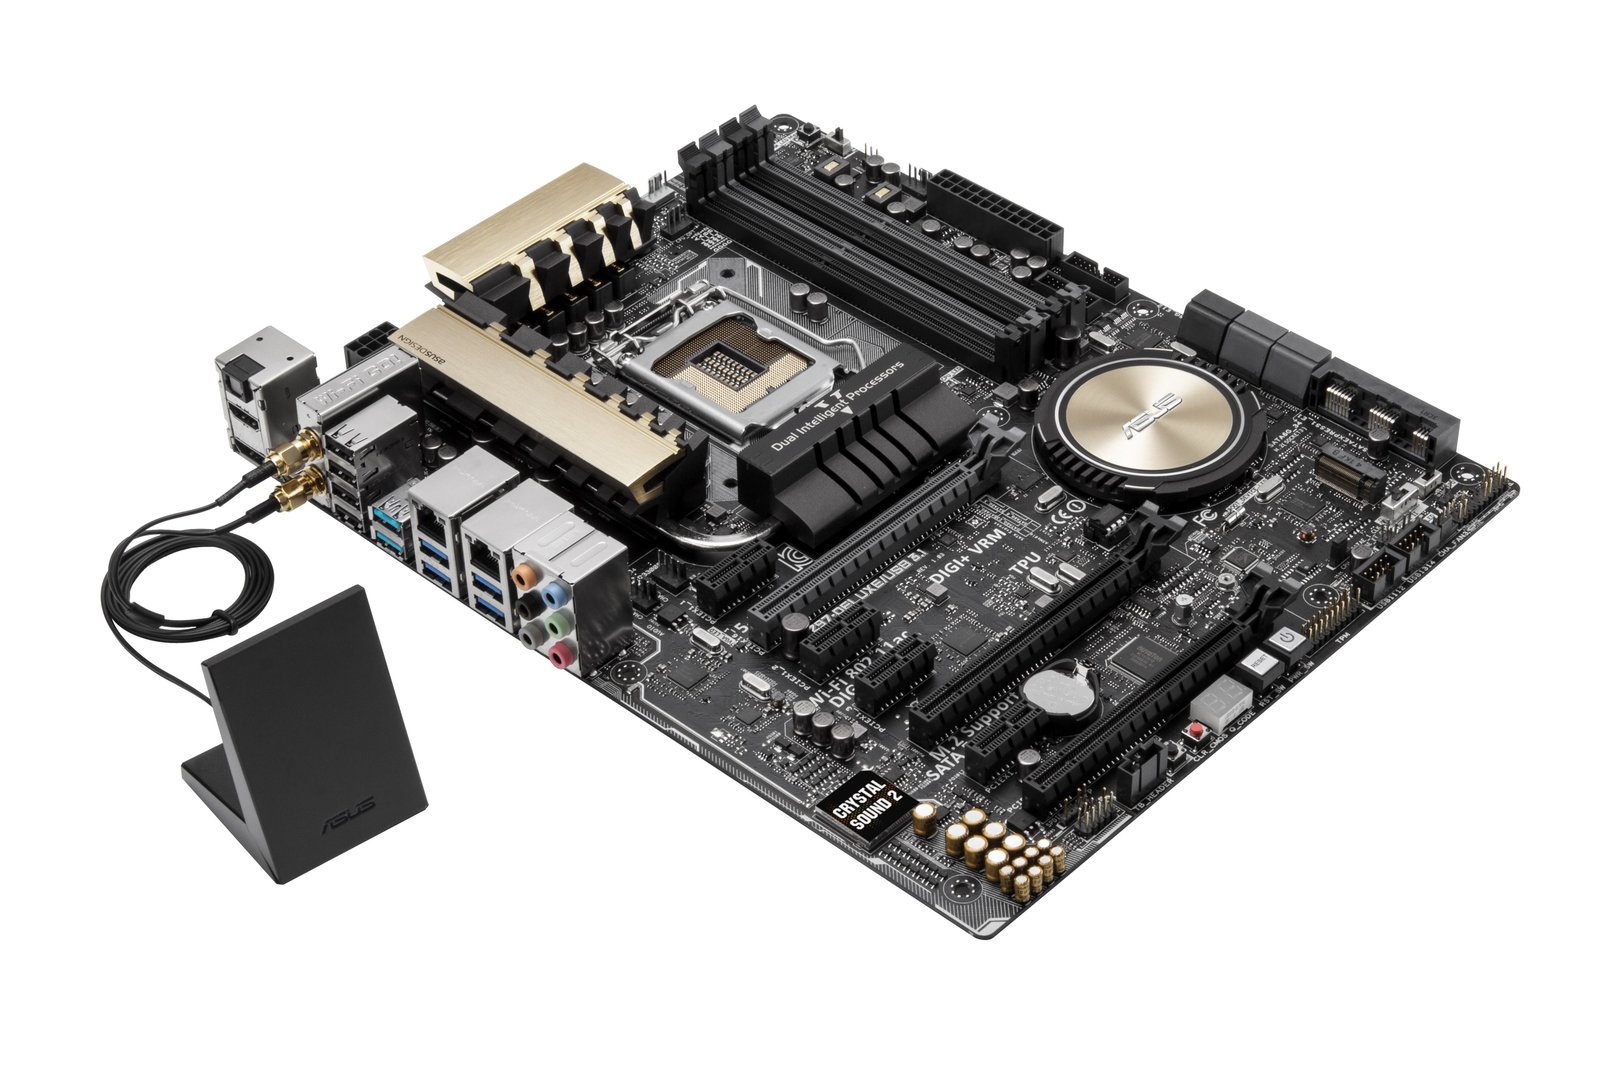 Asus Z97 Deluxe mit USB 3.1 Onboard